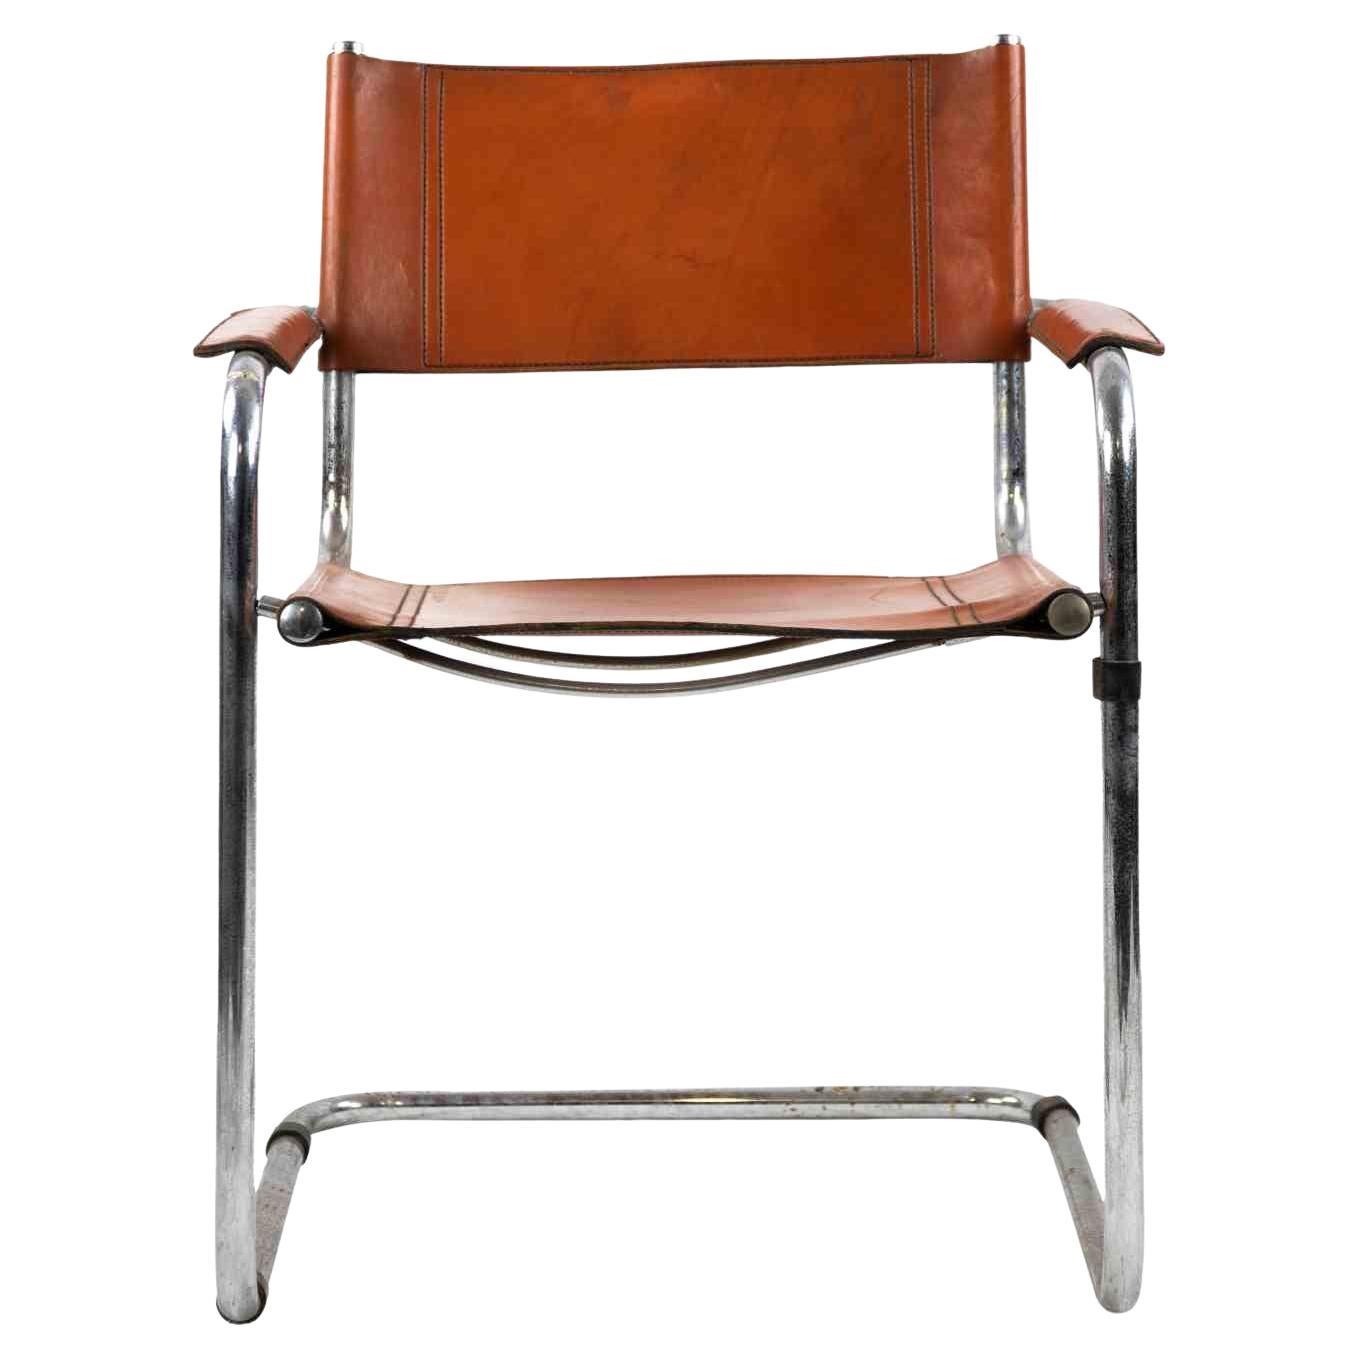 S34 Cognac armachair is an original design seating realized by Marcel Breuer for Fasem in 1970s.

A midcentury armachair realized in steel and aniline leather.

Mint conditions due to the time.

Collect a mid-century icon!